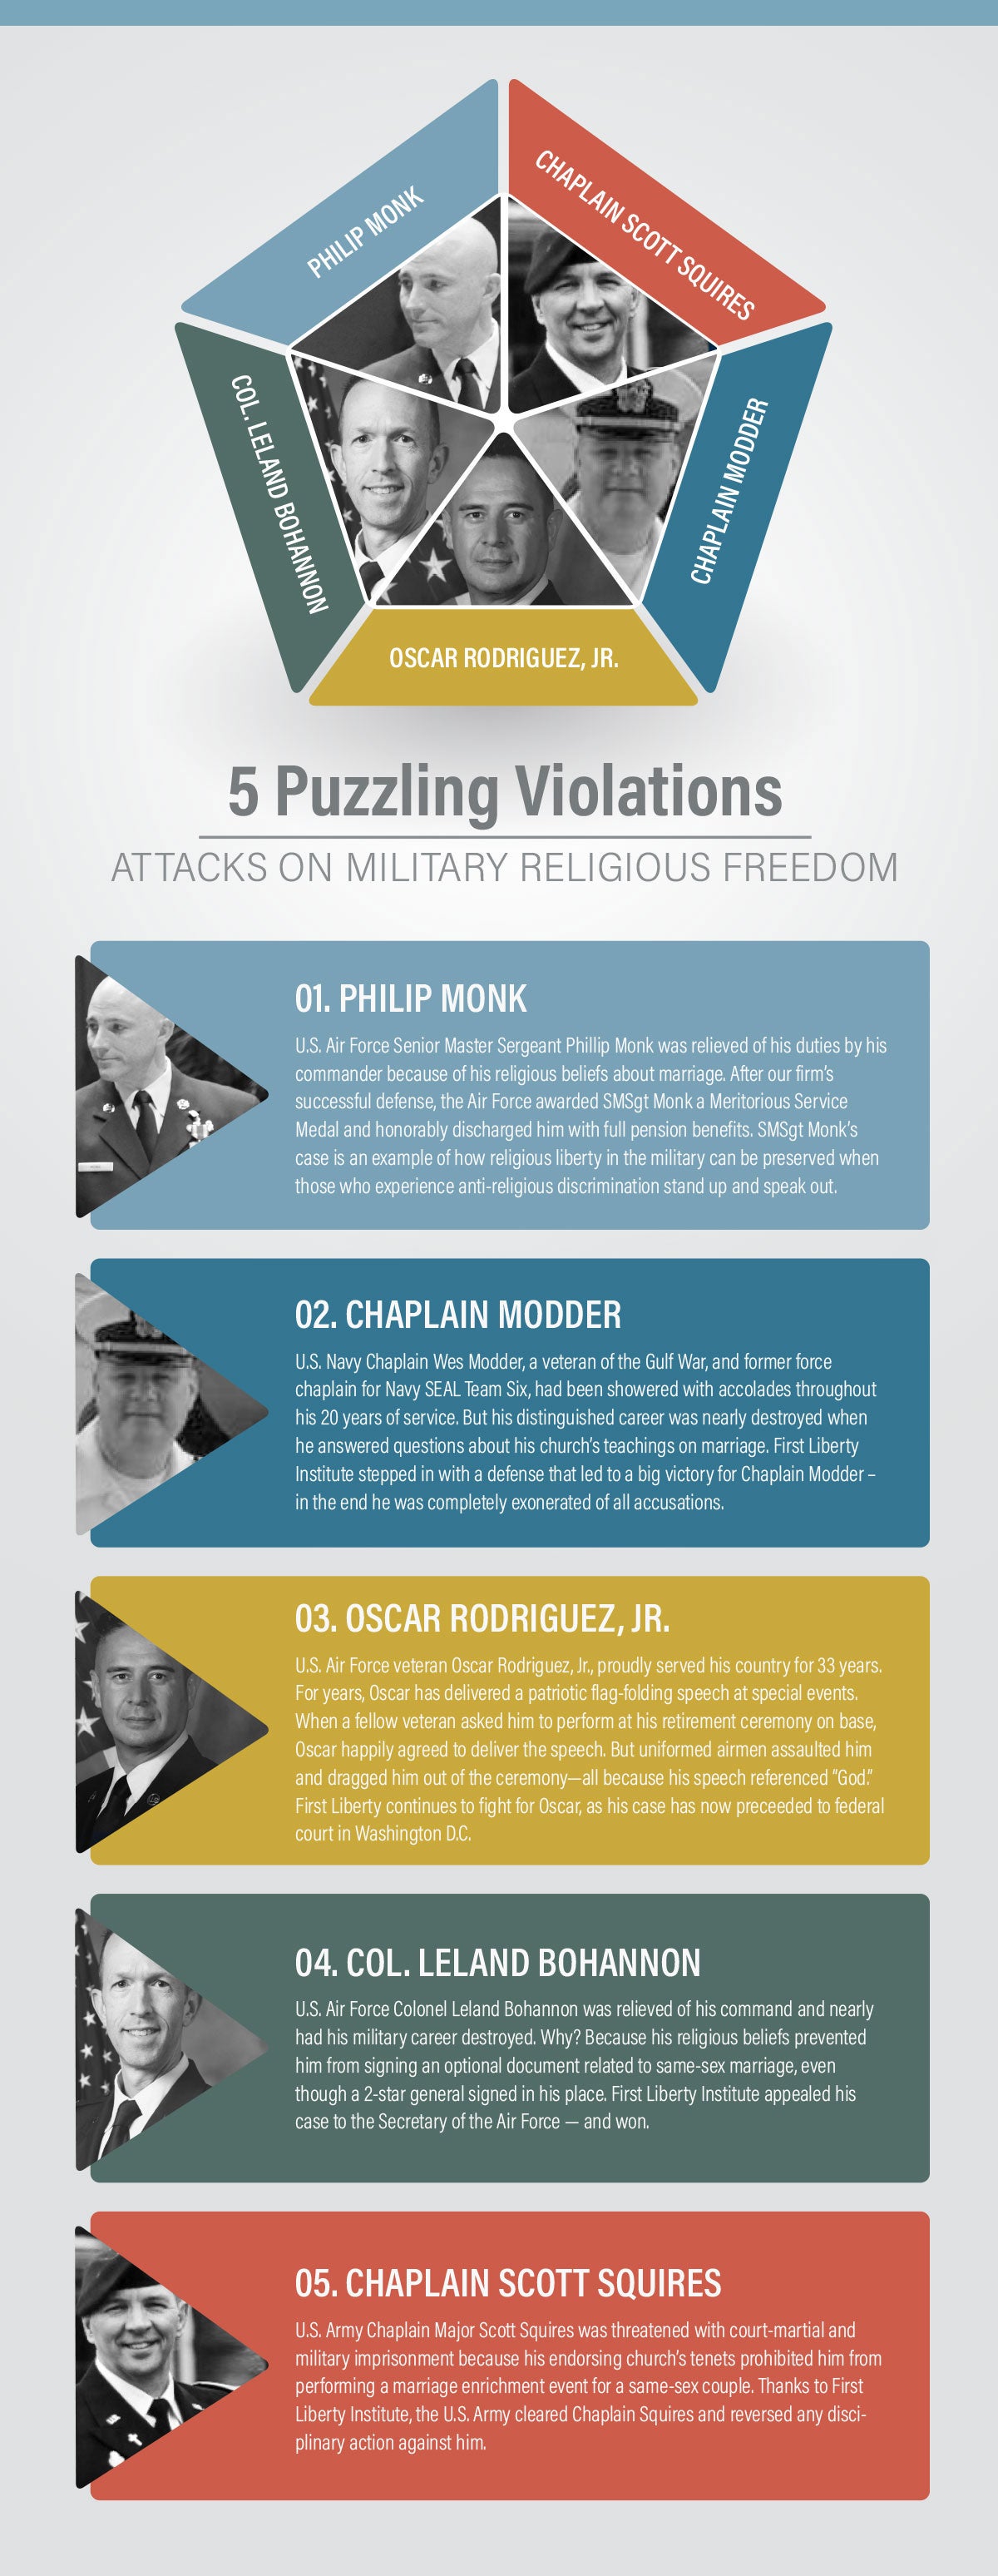 5 Puzzling Violations | First Liberty